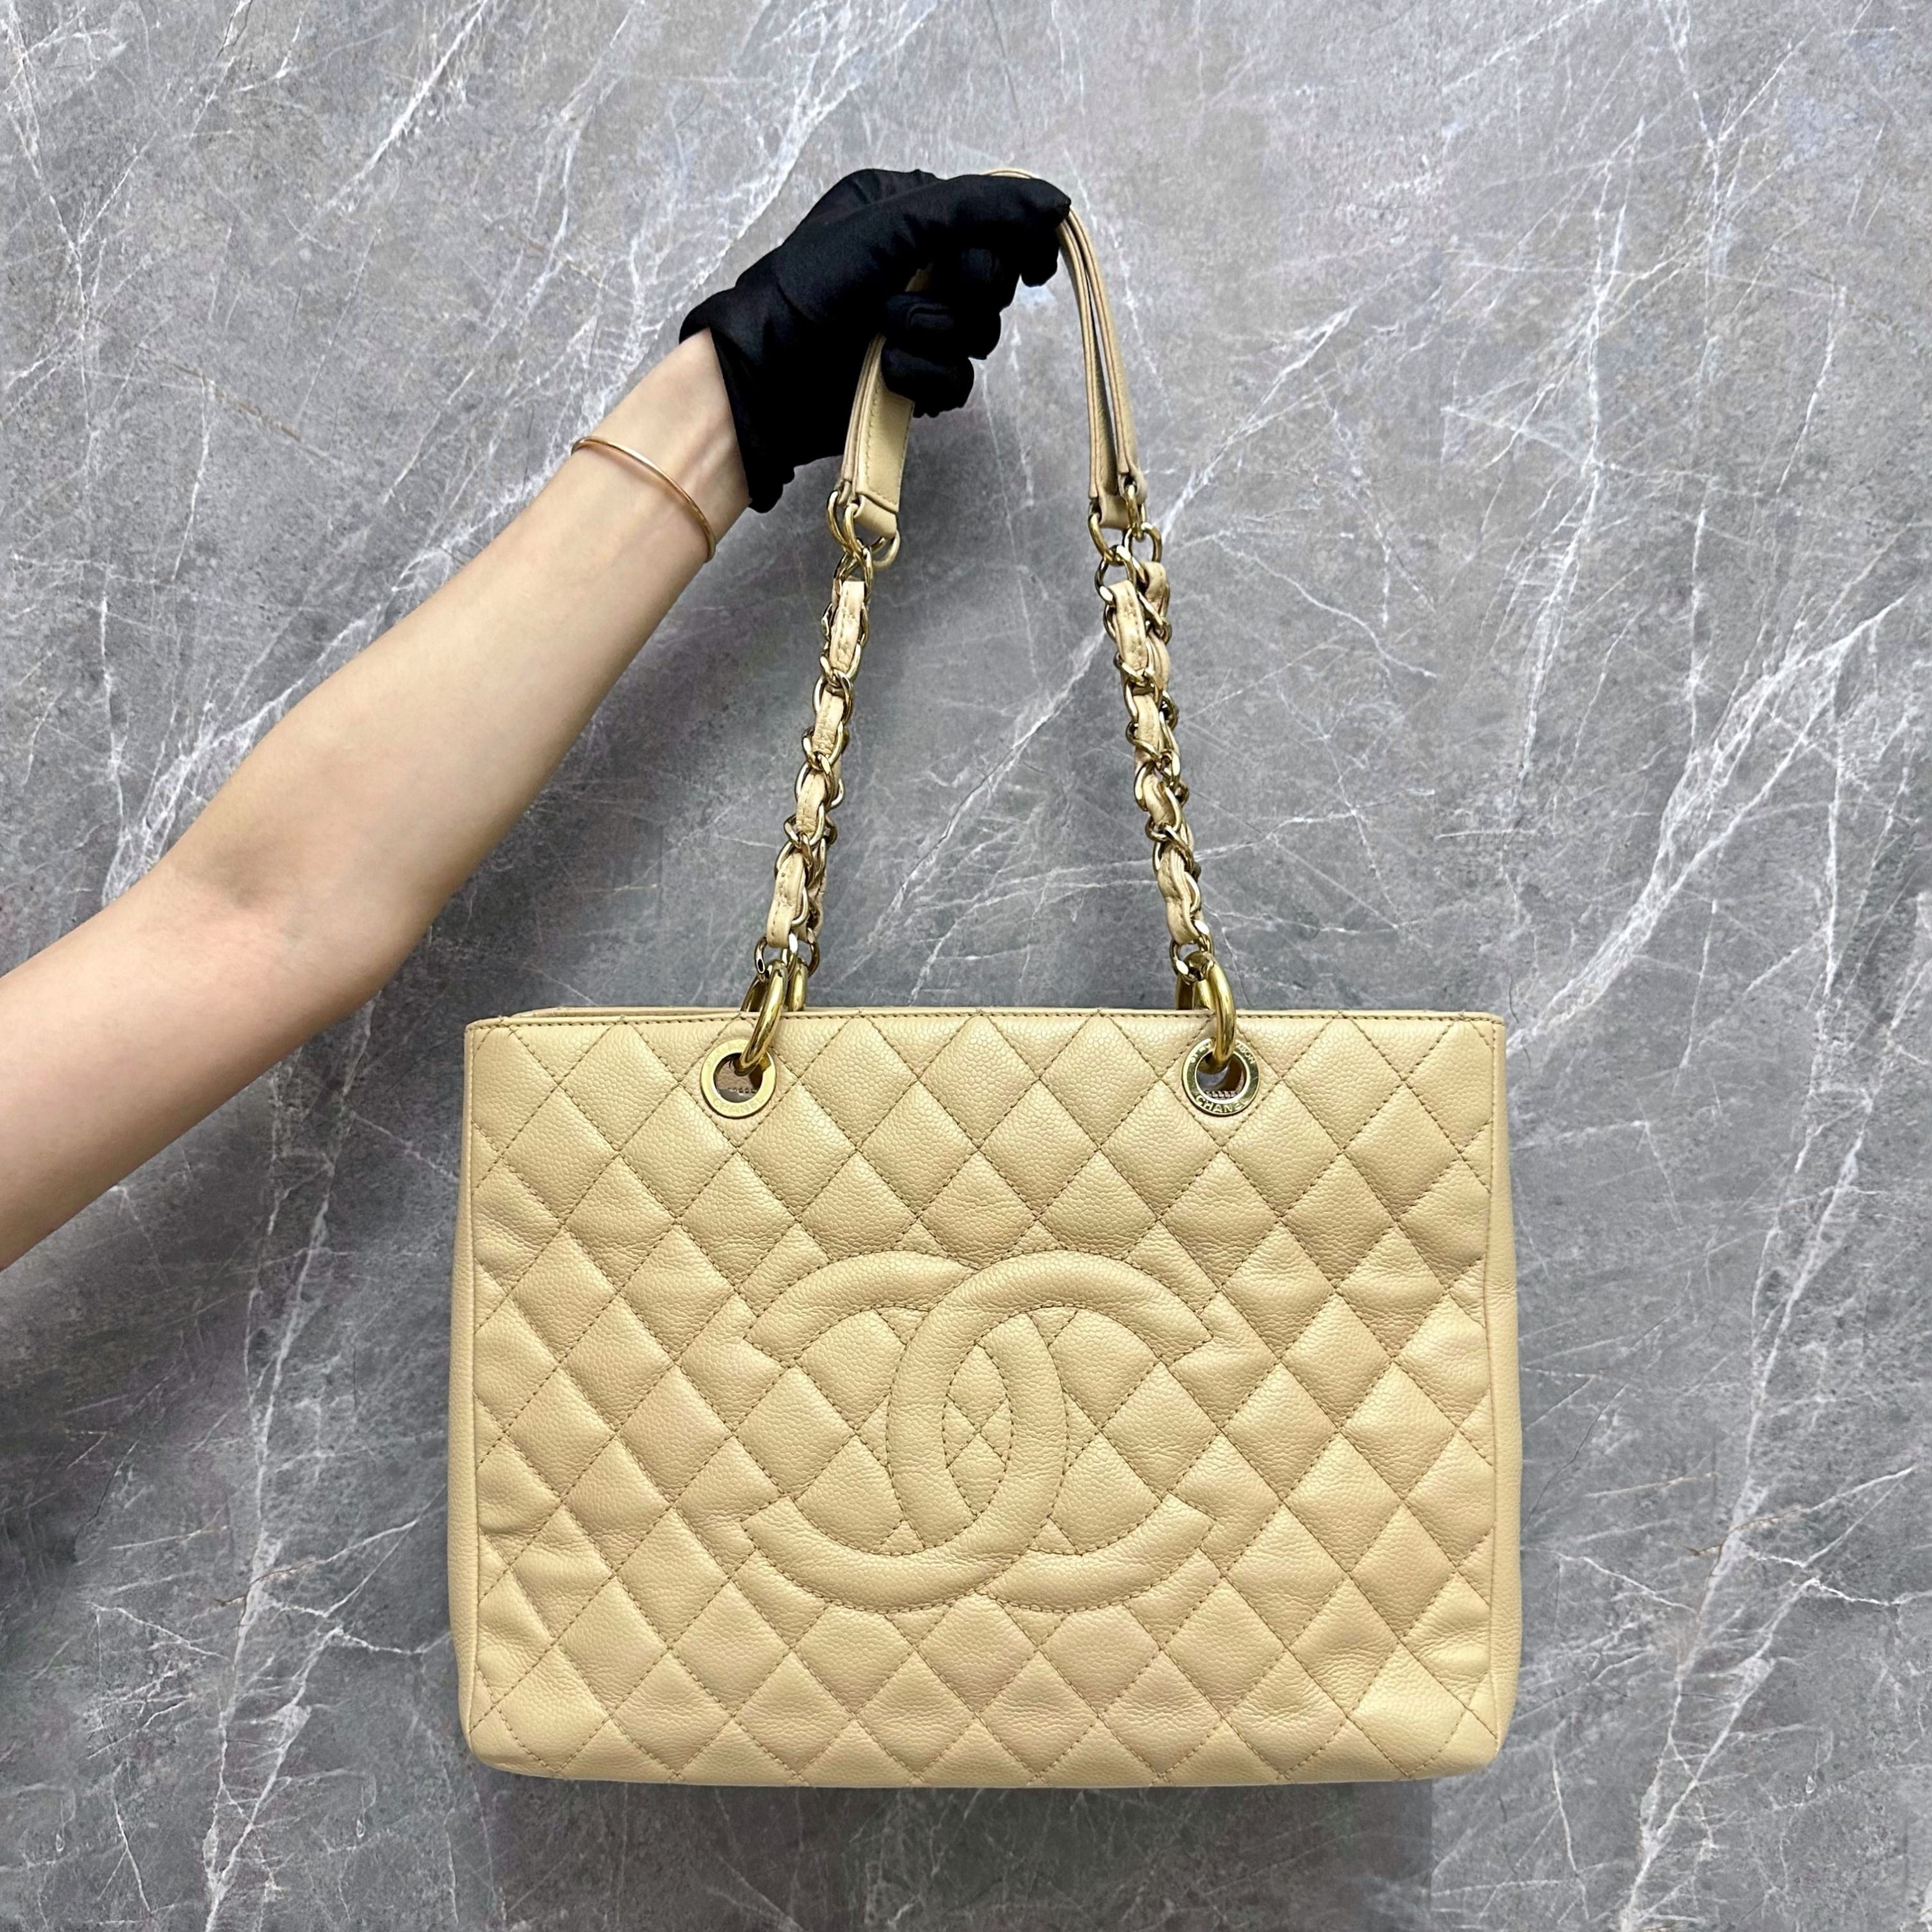 Chanel Grand Shopping Tote GST in Beige Caviar with Gold Hardware - SOLD